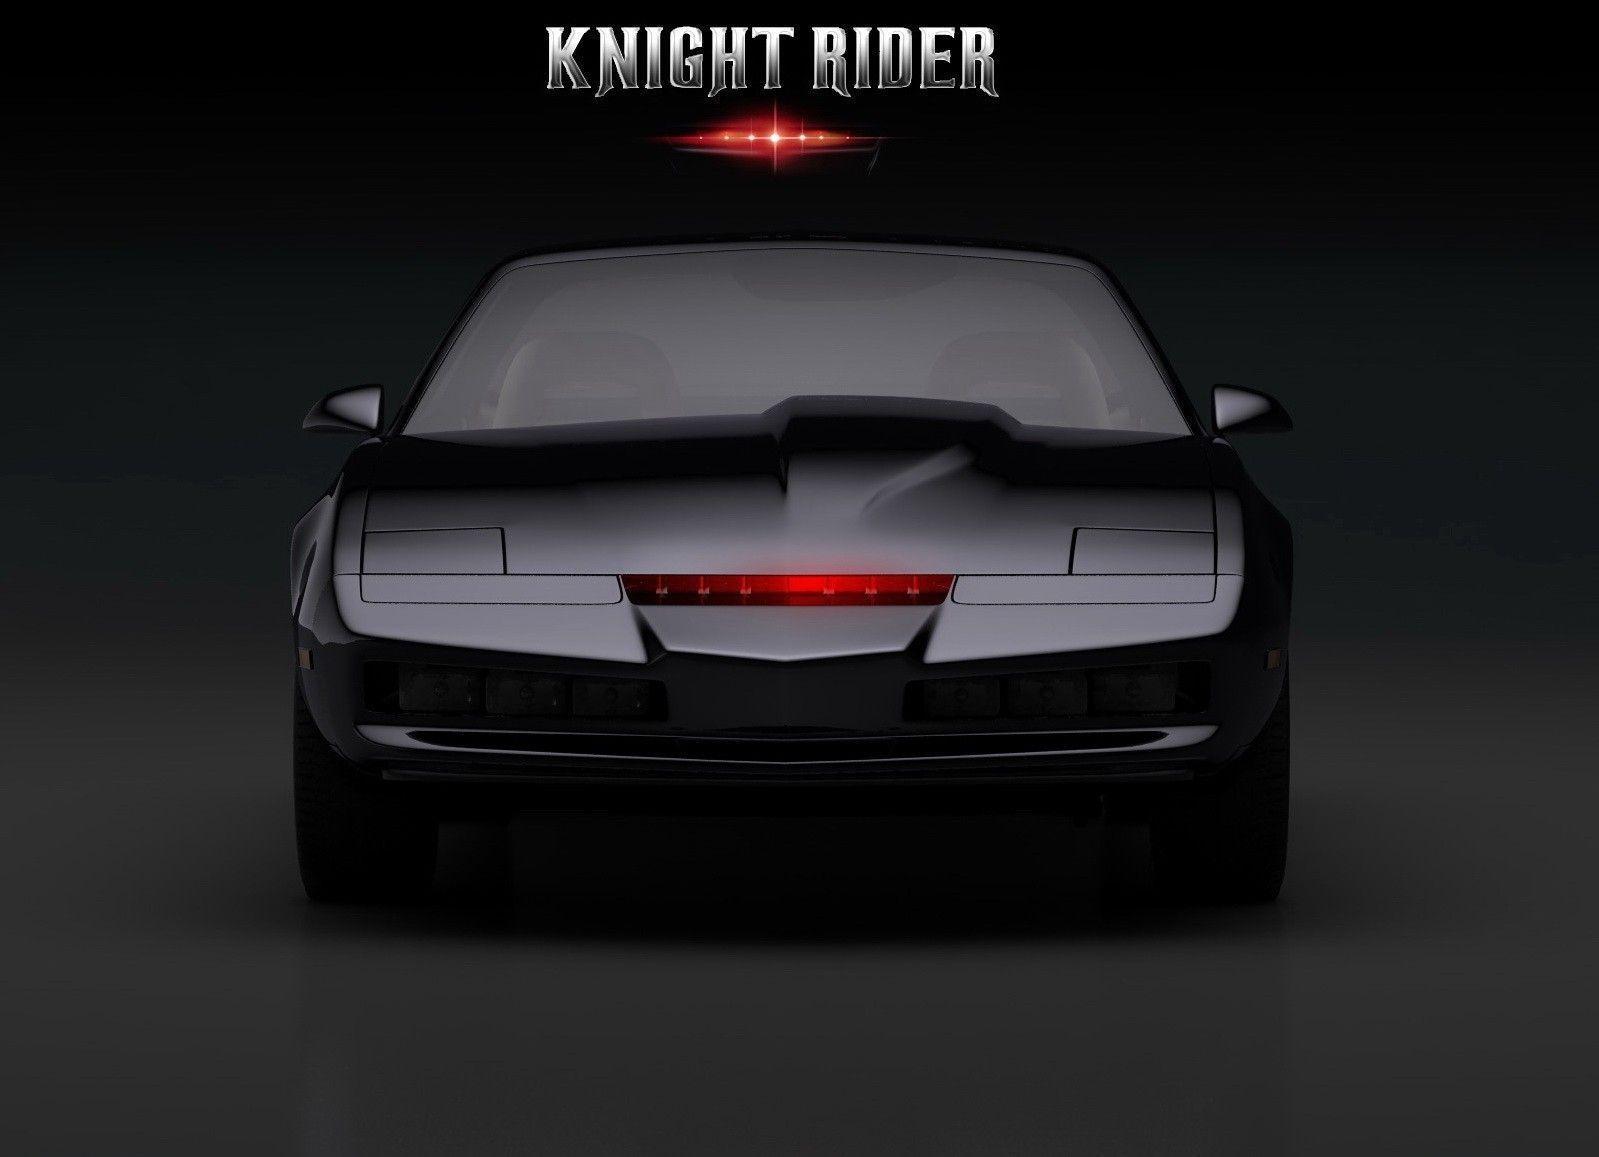 665 New Knight rider car mobile wallpaper for Lock Screen